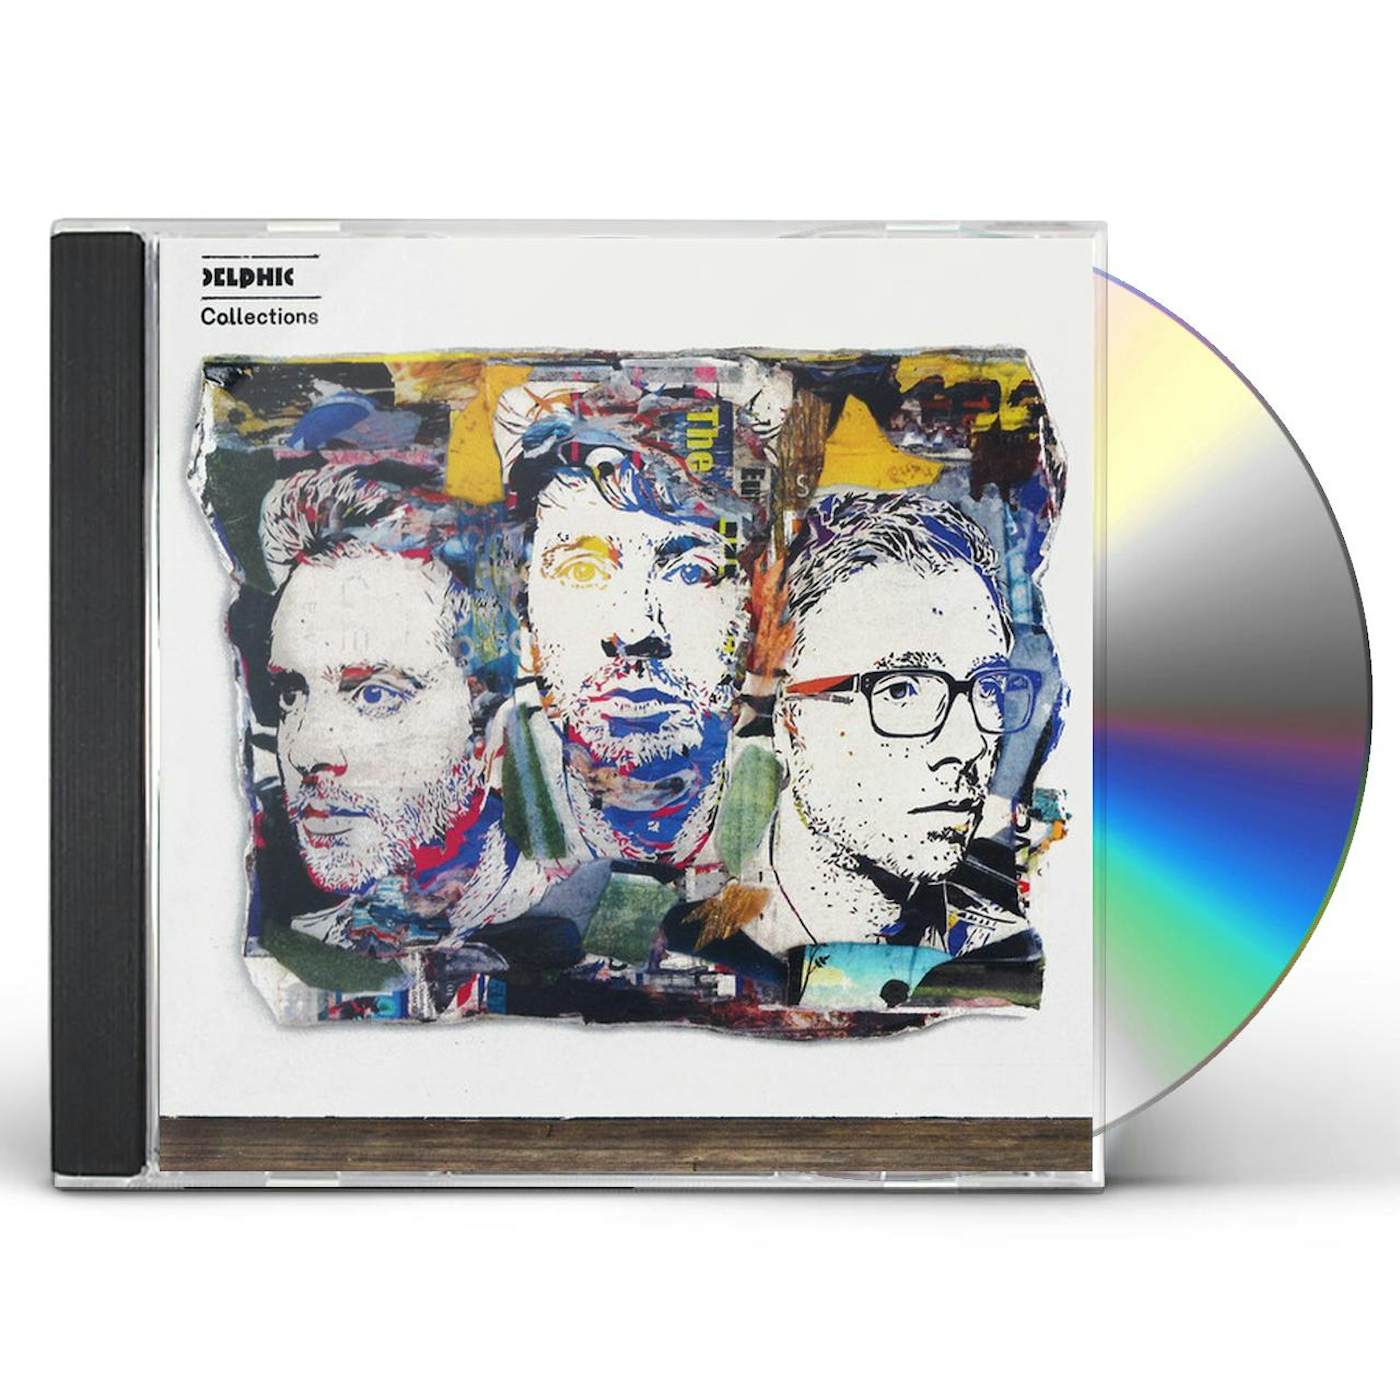 Delphic COLLECTIONS CD